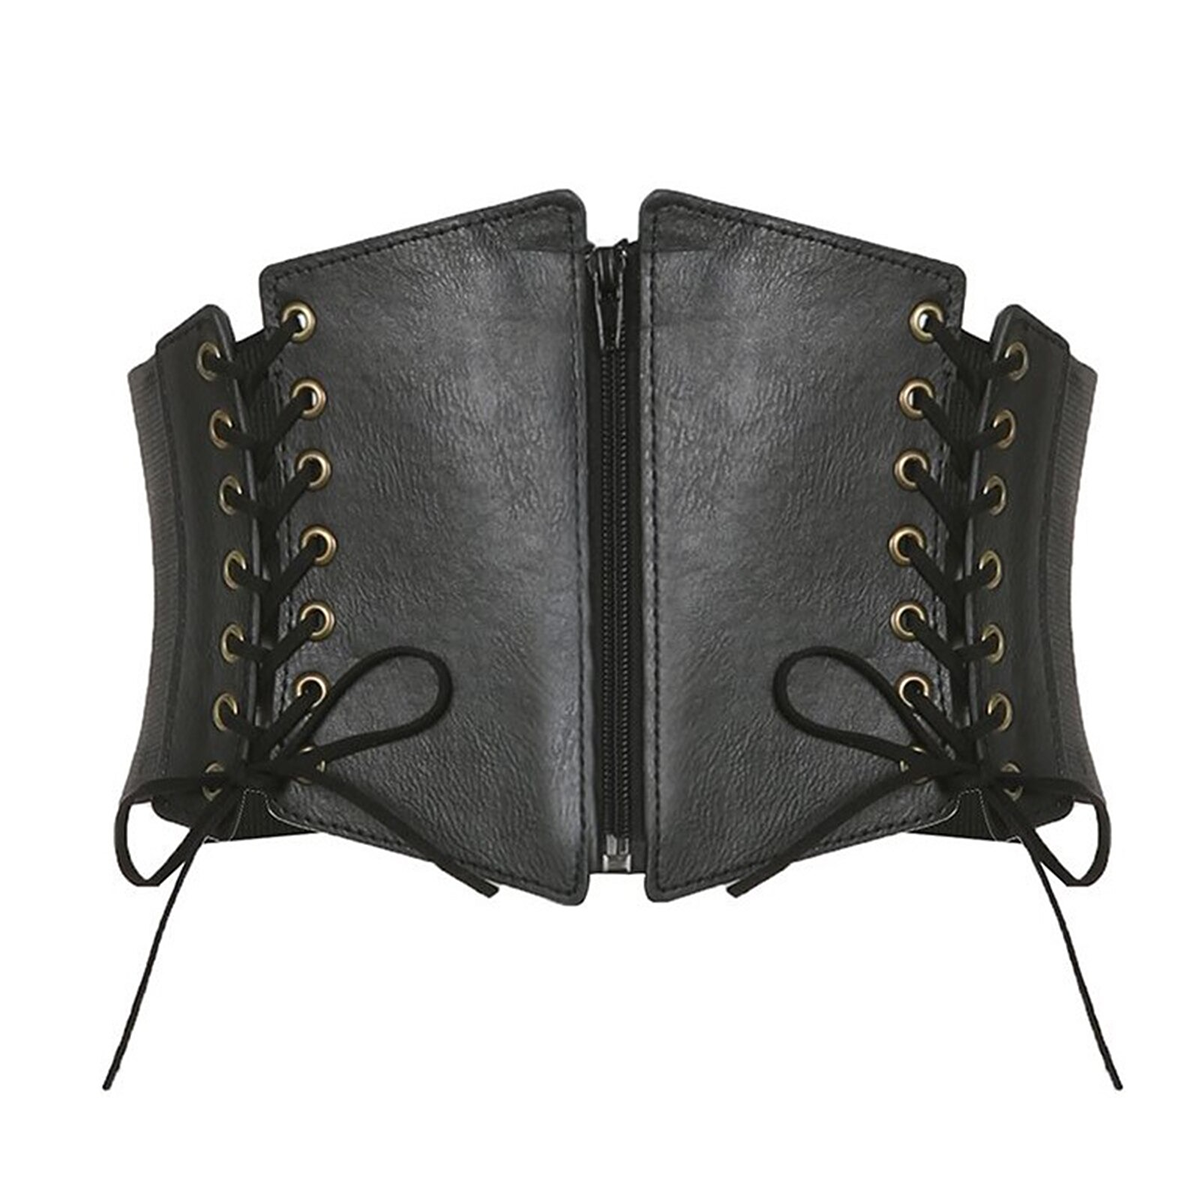 Vintage Women's Lace-Up and Zipper Up Wide Belt / Elegant Slim Corset Belt in Gothic Style - HARD'N'HEAVY